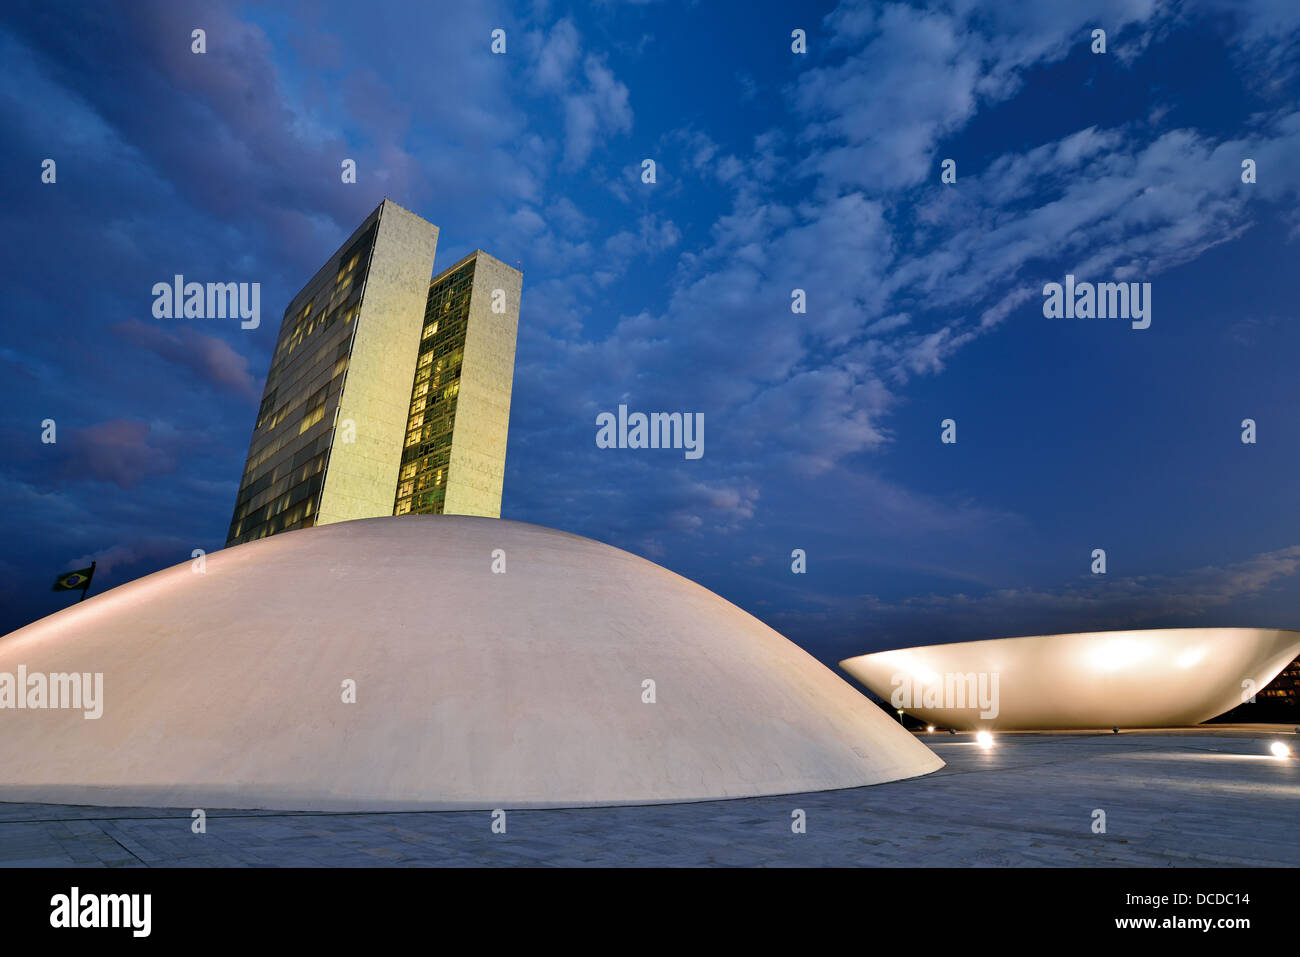 Brazil, Brasilia: Special view of the National Congress by night Stock Photo